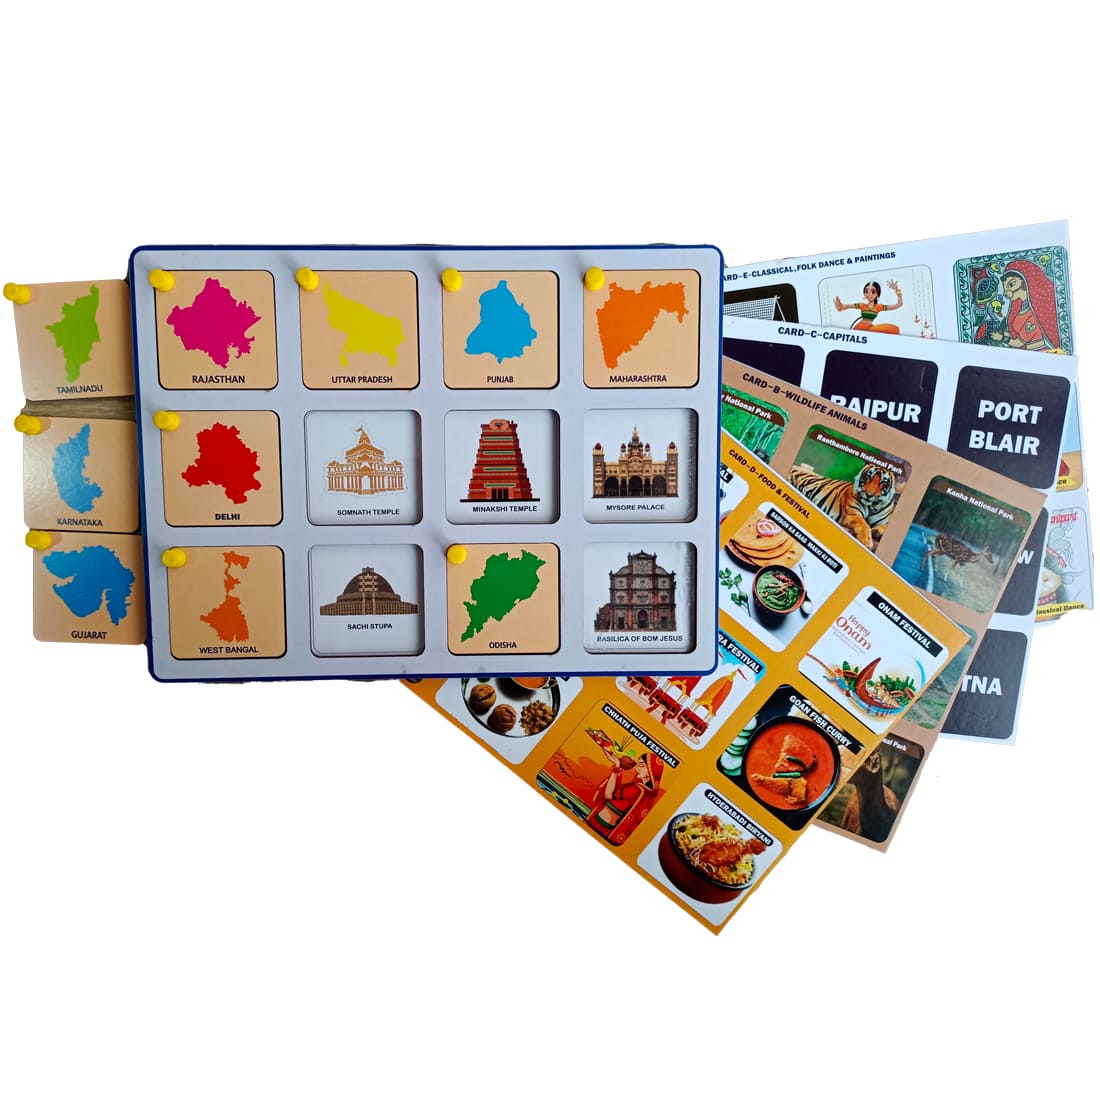 India Explore Activity game - Board Game with Activity Cards for Kids - Learning Game